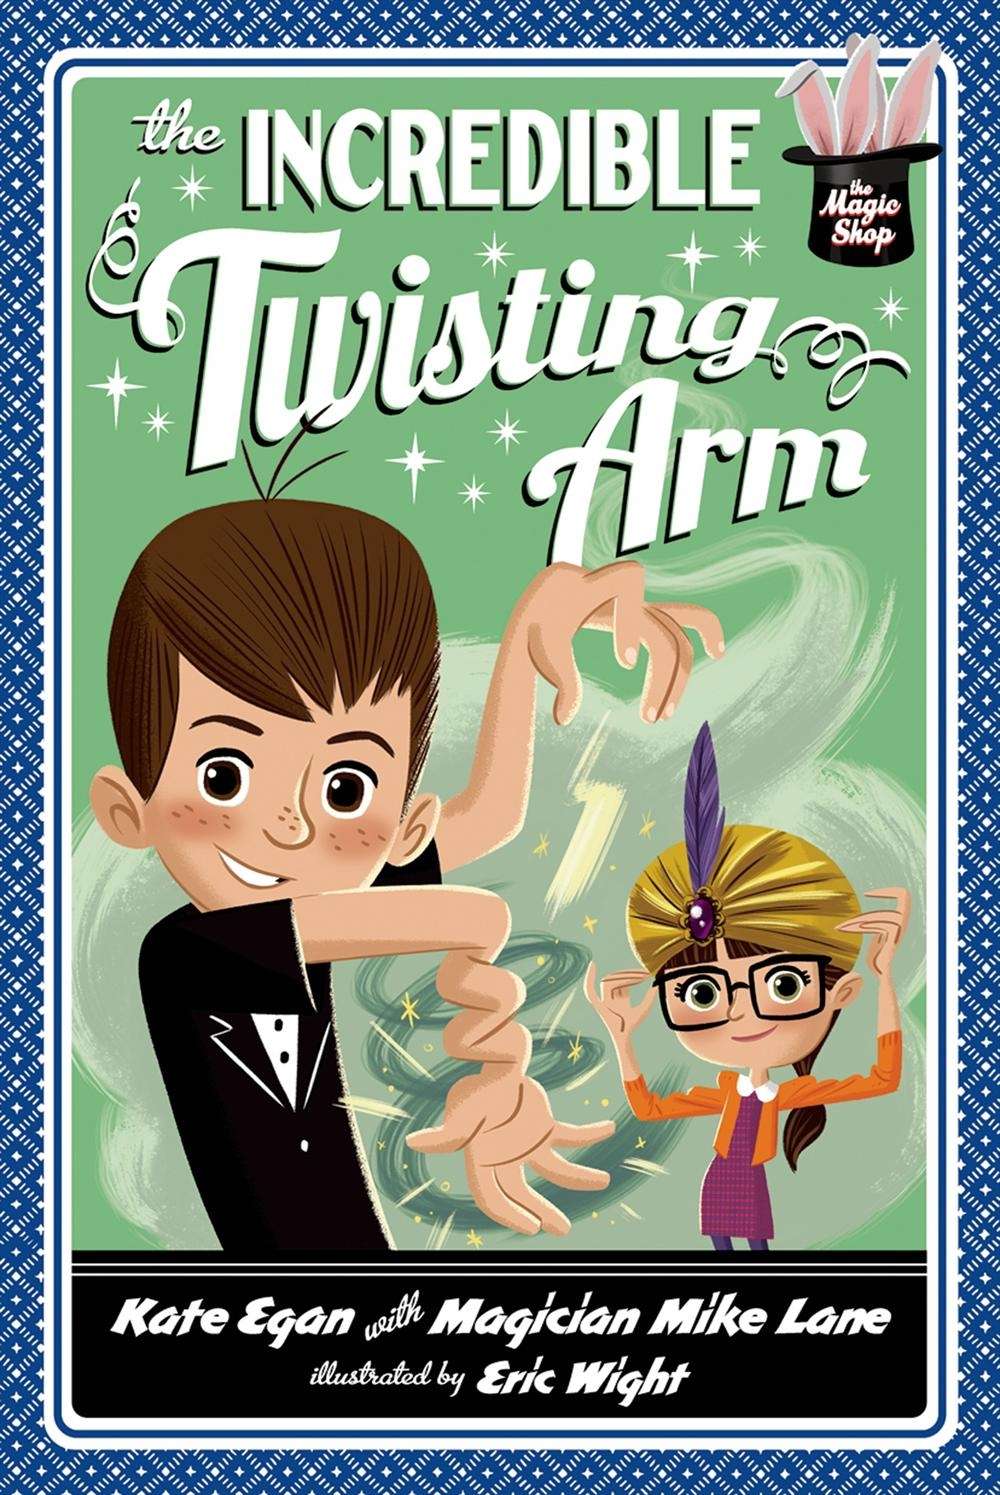 The Incredible Twisting Arm